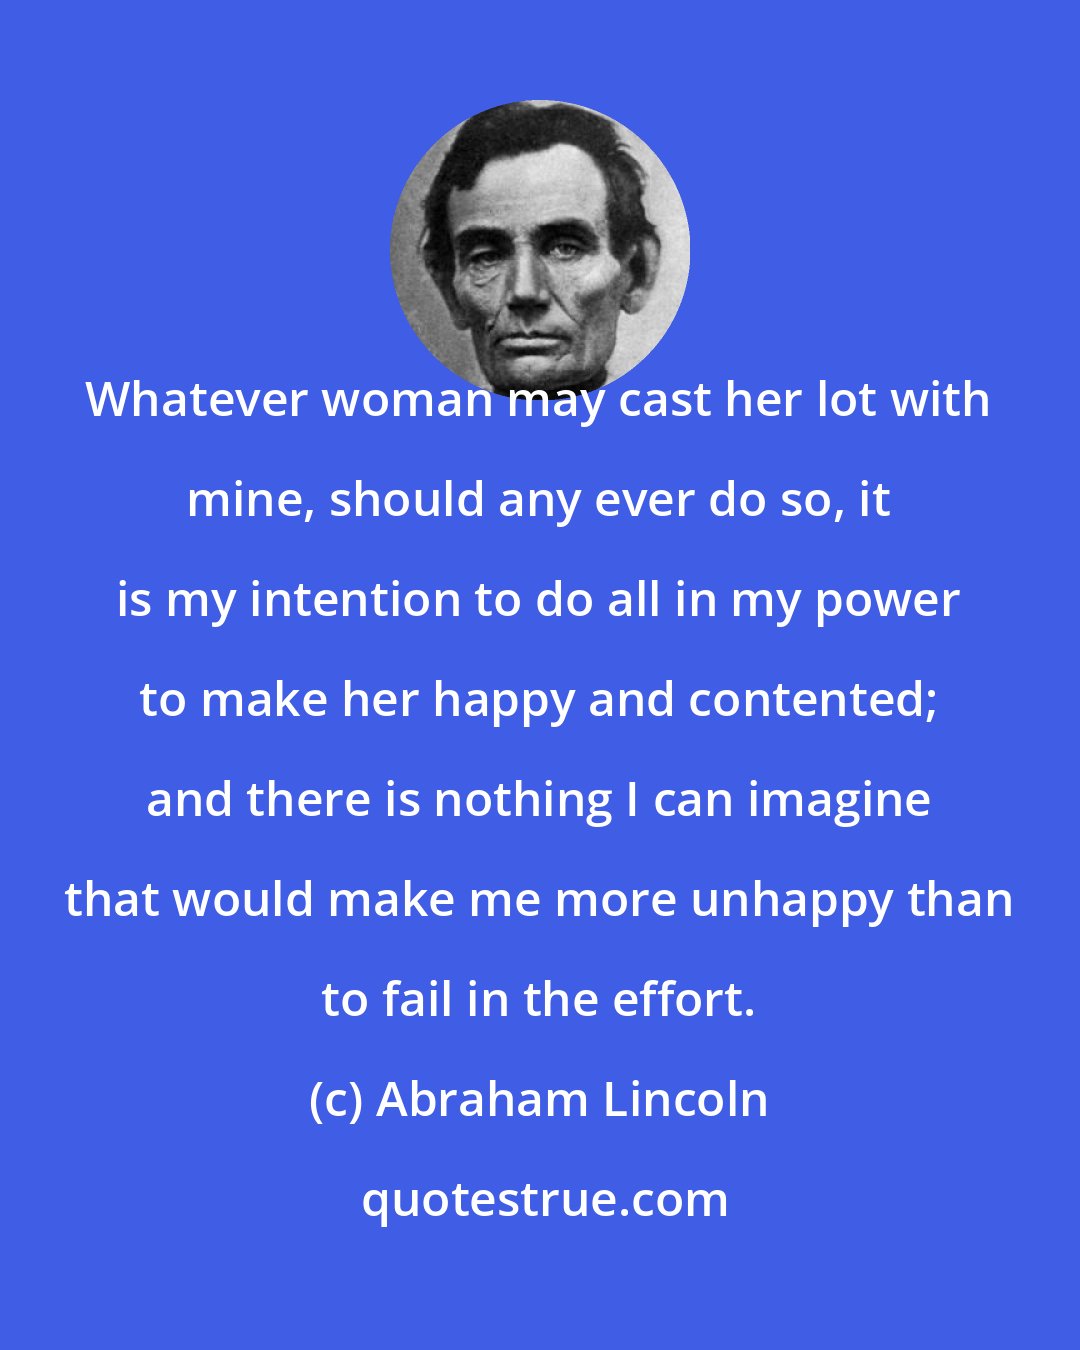 Abraham Lincoln: Whatever woman may cast her lot with mine, should any ever do so, it is my intention to do all in my power to make her happy and contented; and there is nothing I can imagine that would make me more unhappy than to fail in the effort.